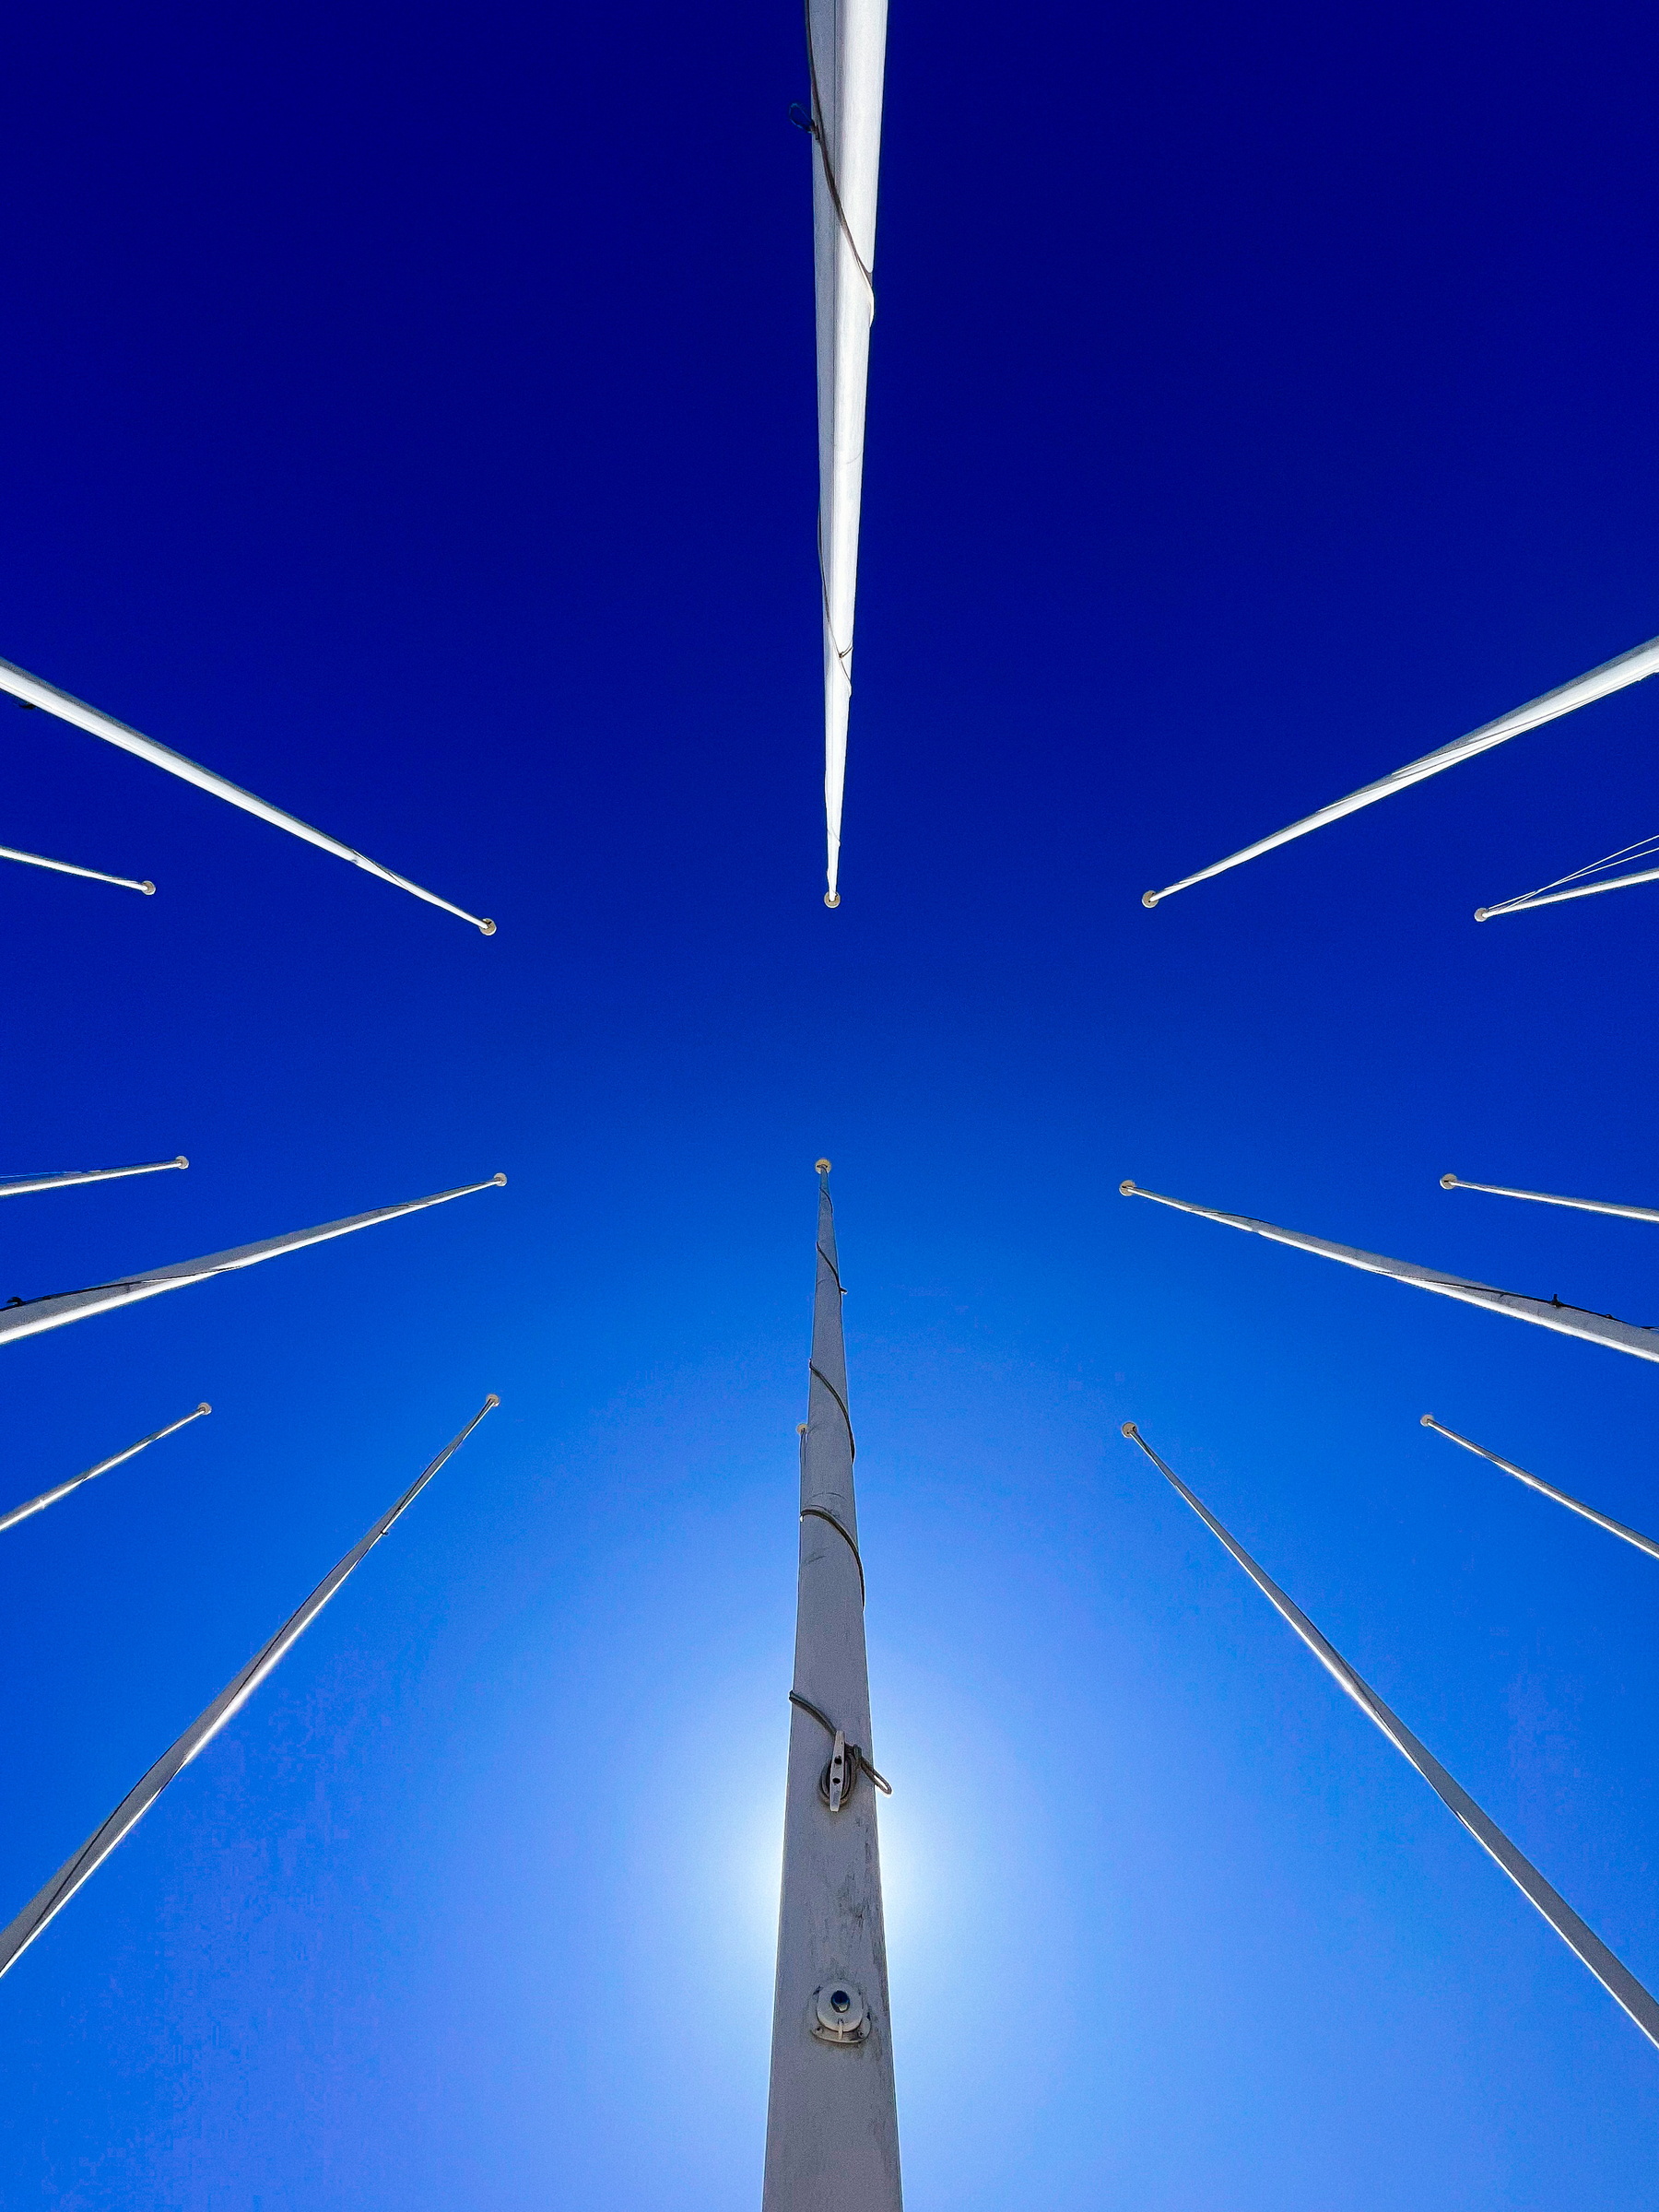 Looking up, in the middle of flag poles. 